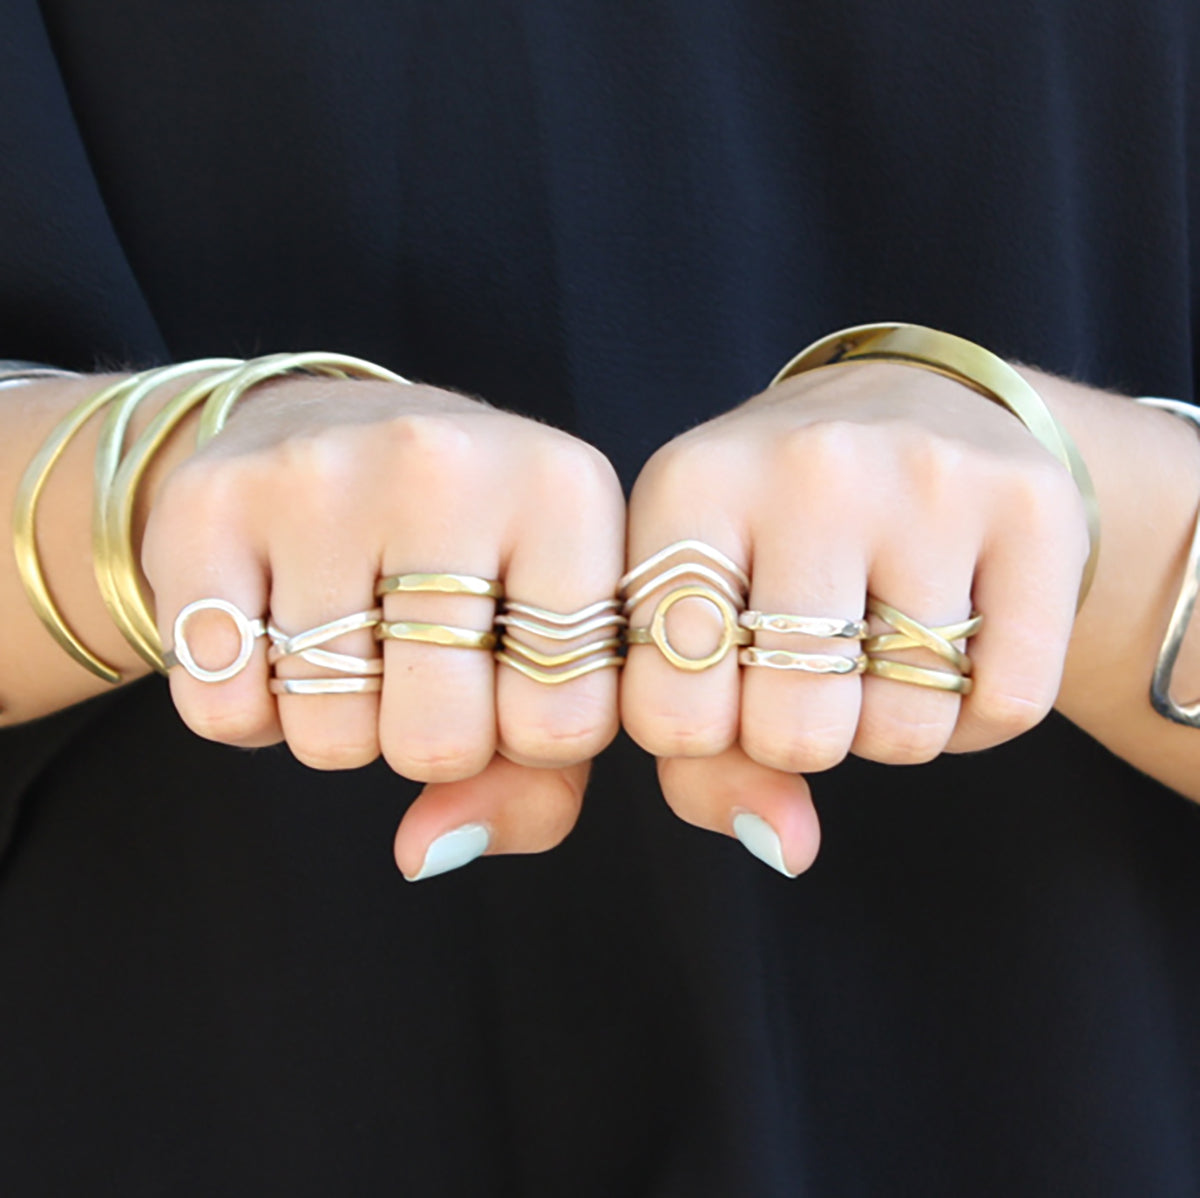 A model shows the fronts of her two fists, each finger adorned with multiple gold and silver rings.